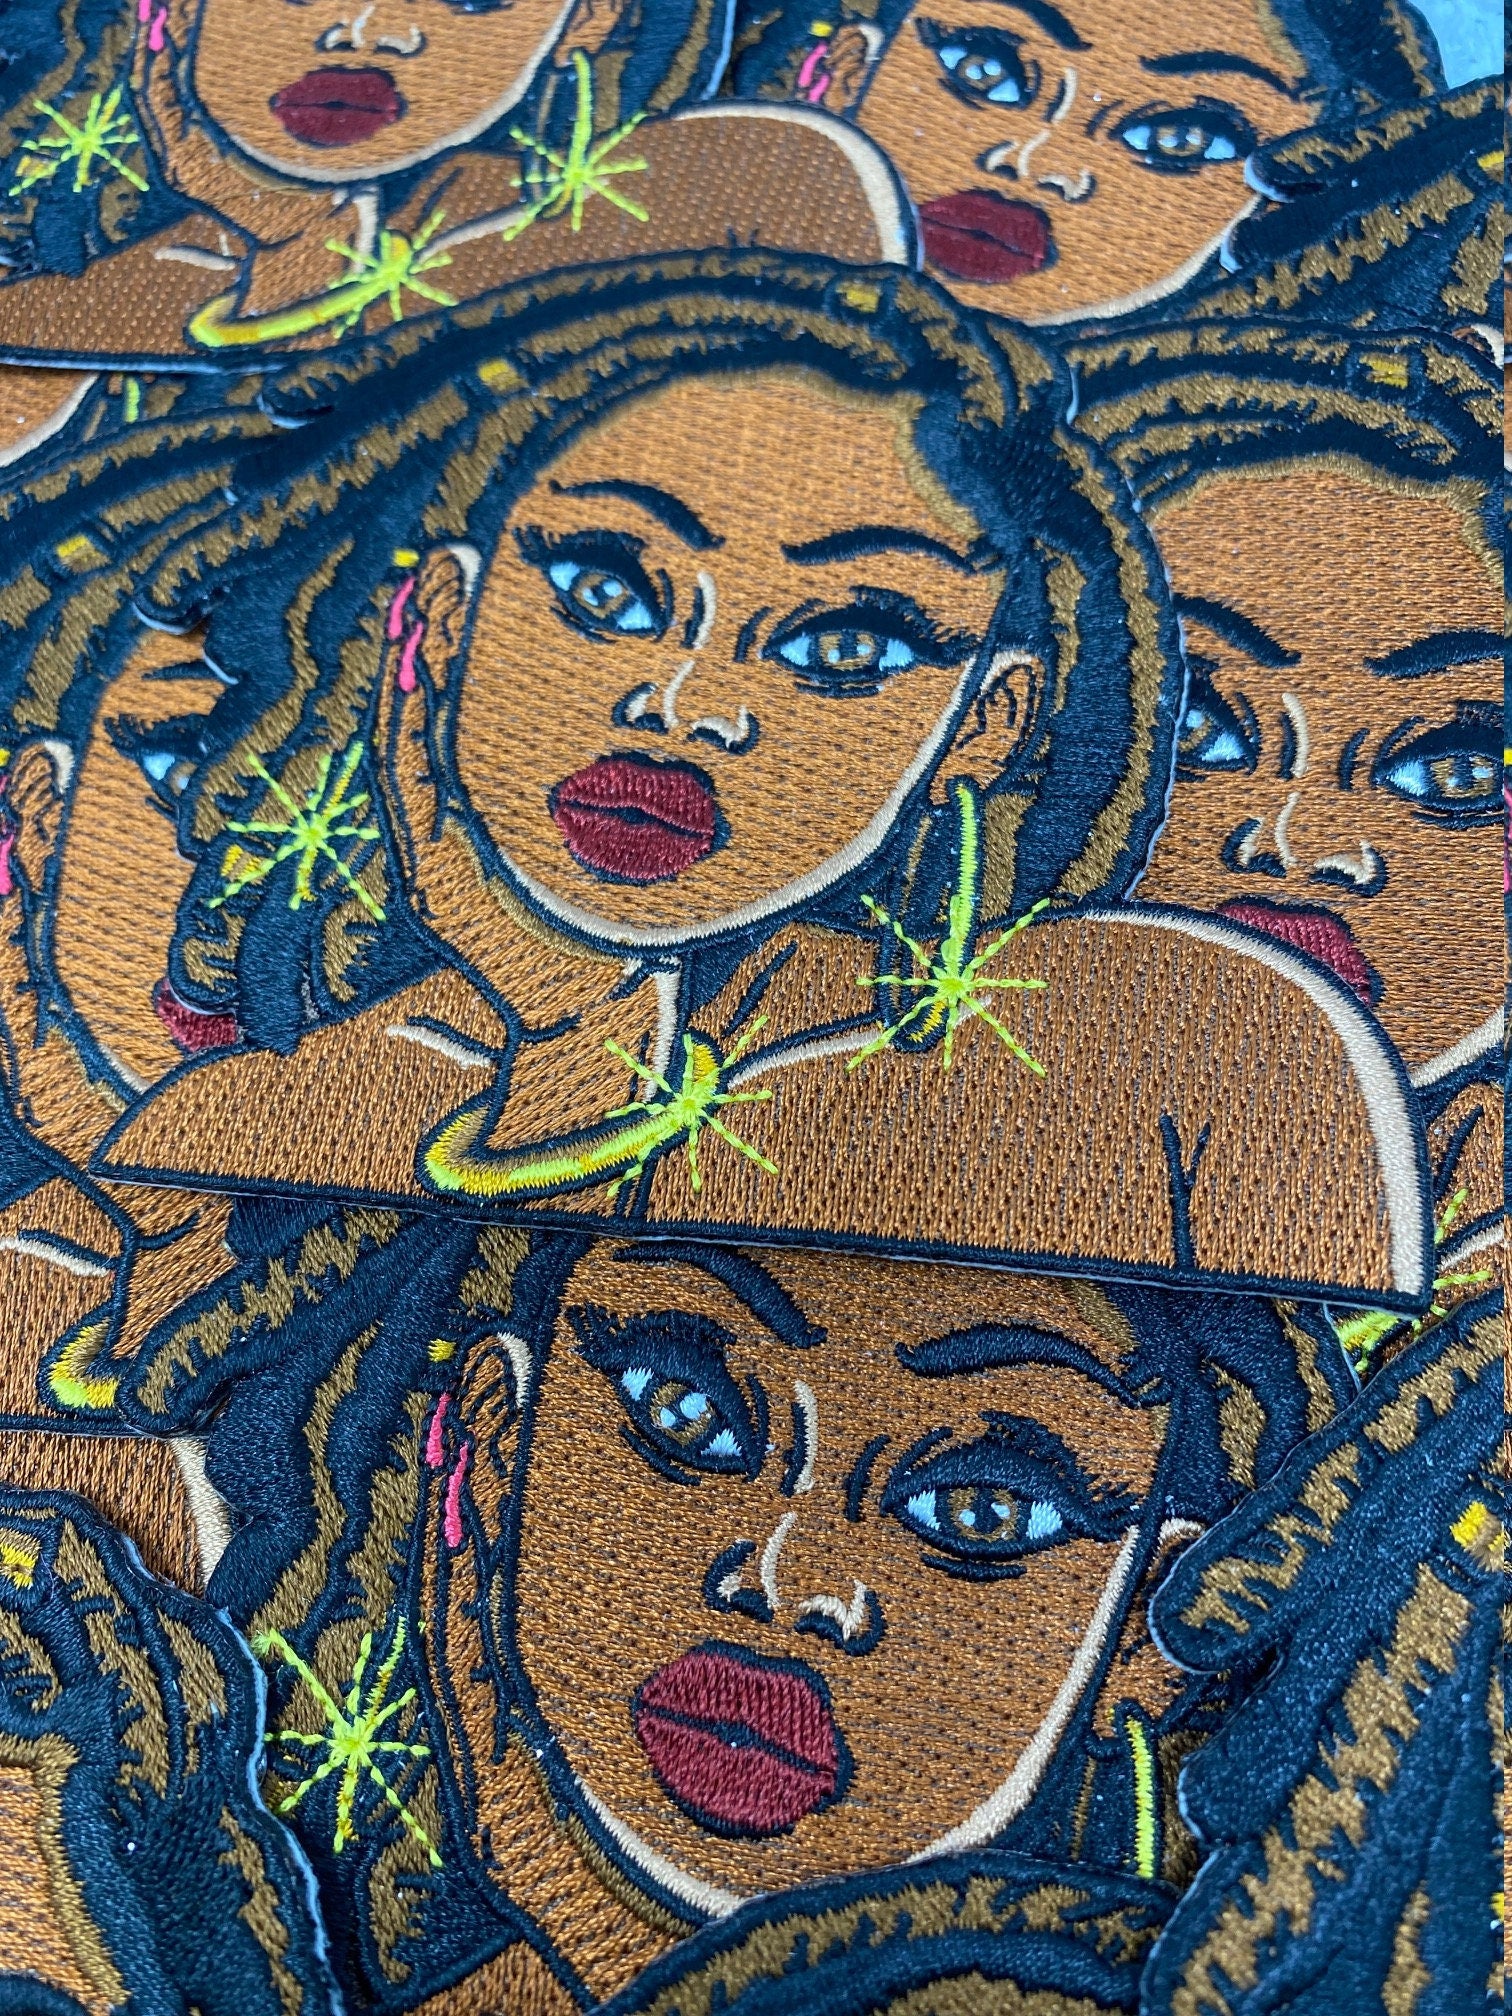 NEW ARRIVAL, Sparkly Loc'd Queen, 4" Iron-on Patch,Applique for Clothing, Glam Girl, Girl Boss Patch for Hats, and Jackets